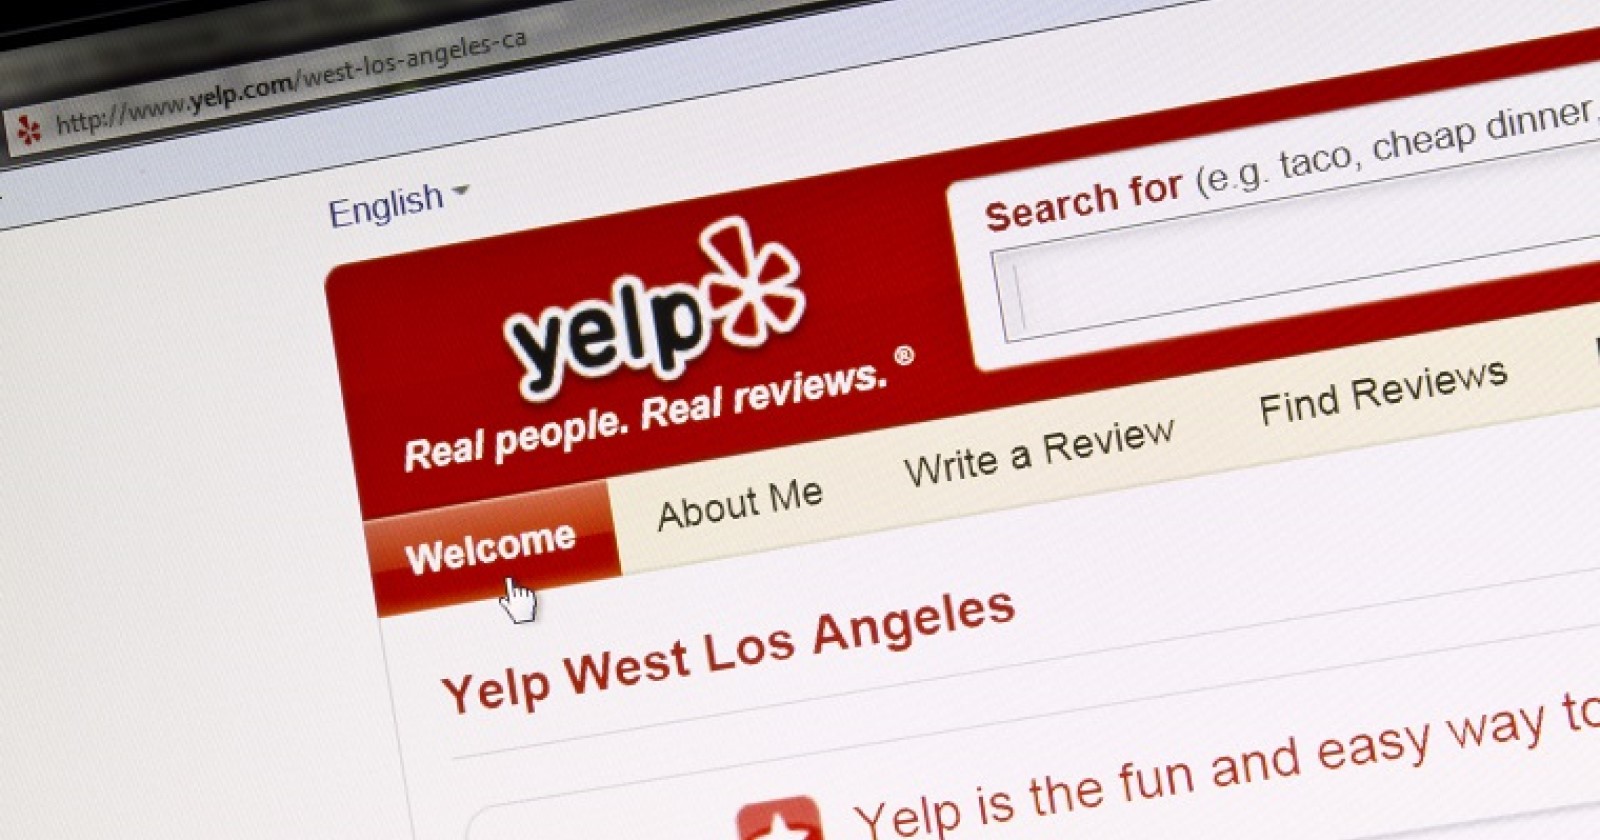 Yelp SEO: How to Optimize Your Listings & Rank Higher